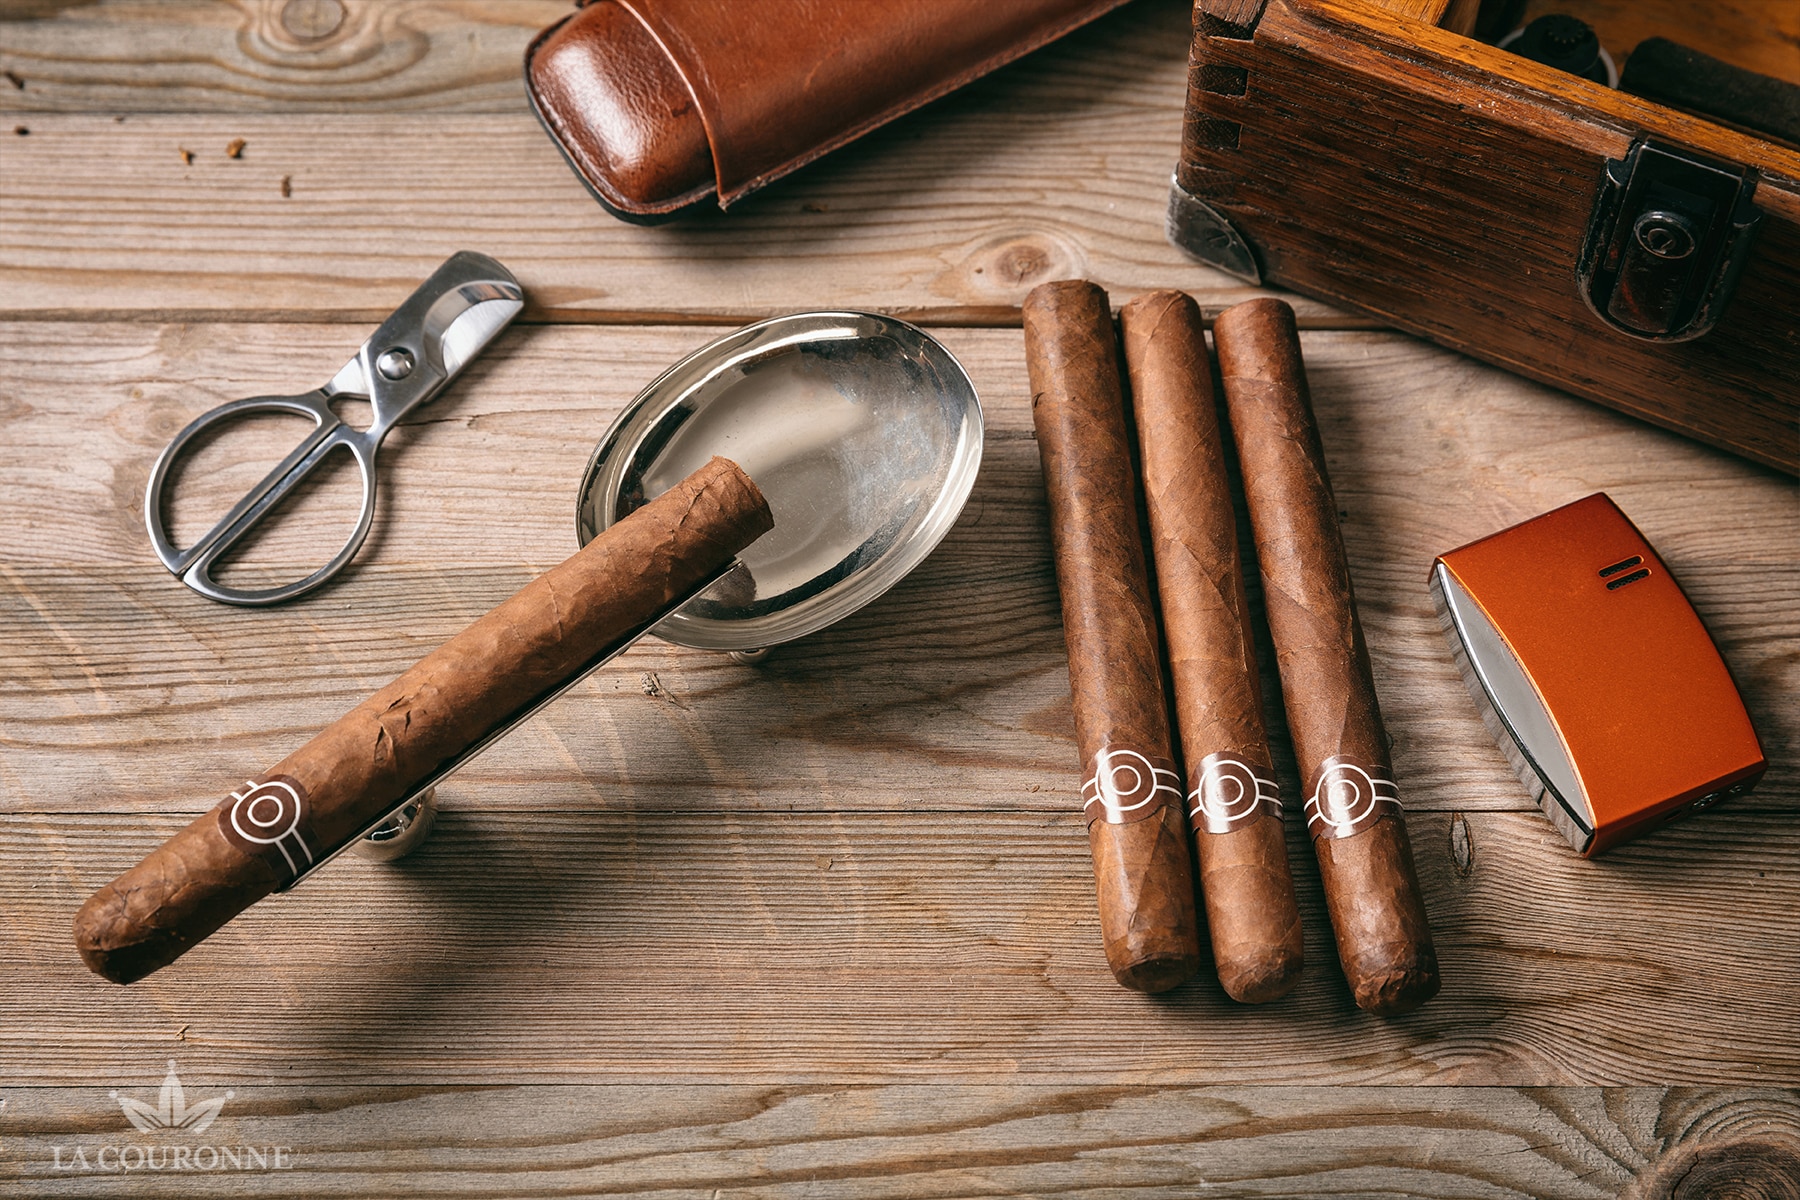 The essential accessories to smoke a cigar